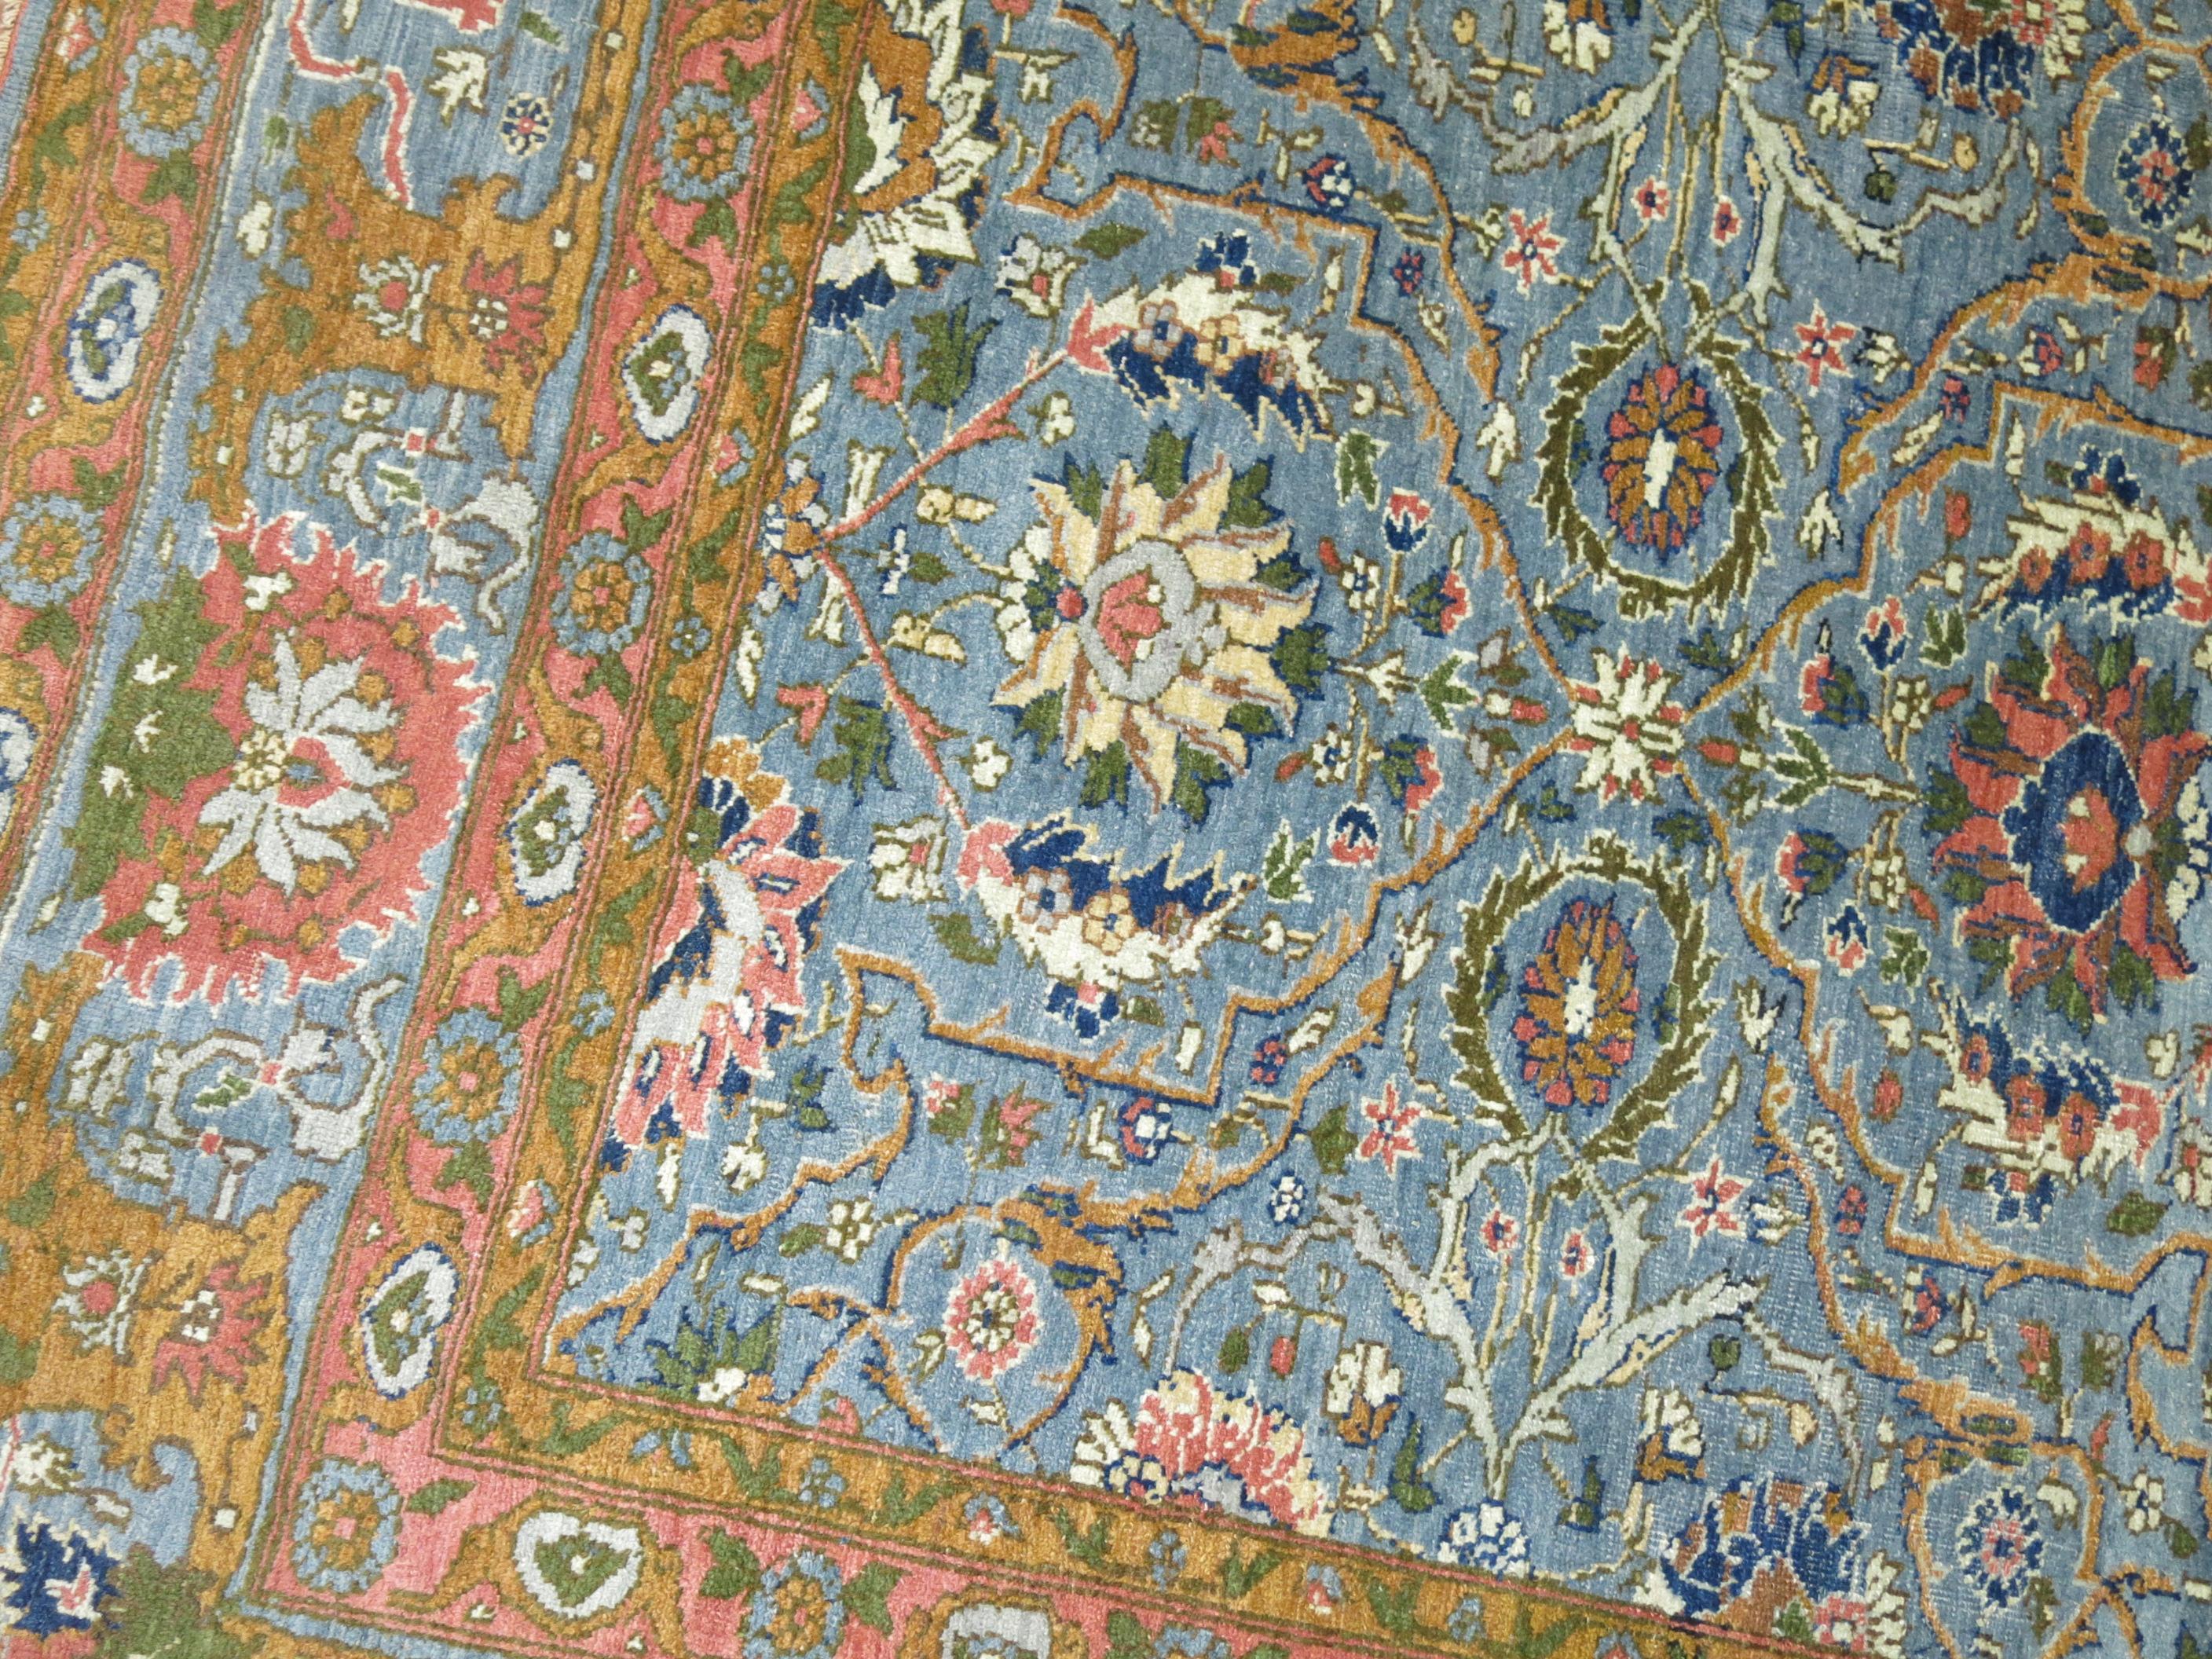 Zabihi Collection Antique Persian Tabriz Carpet In Good Condition For Sale In New York, NY